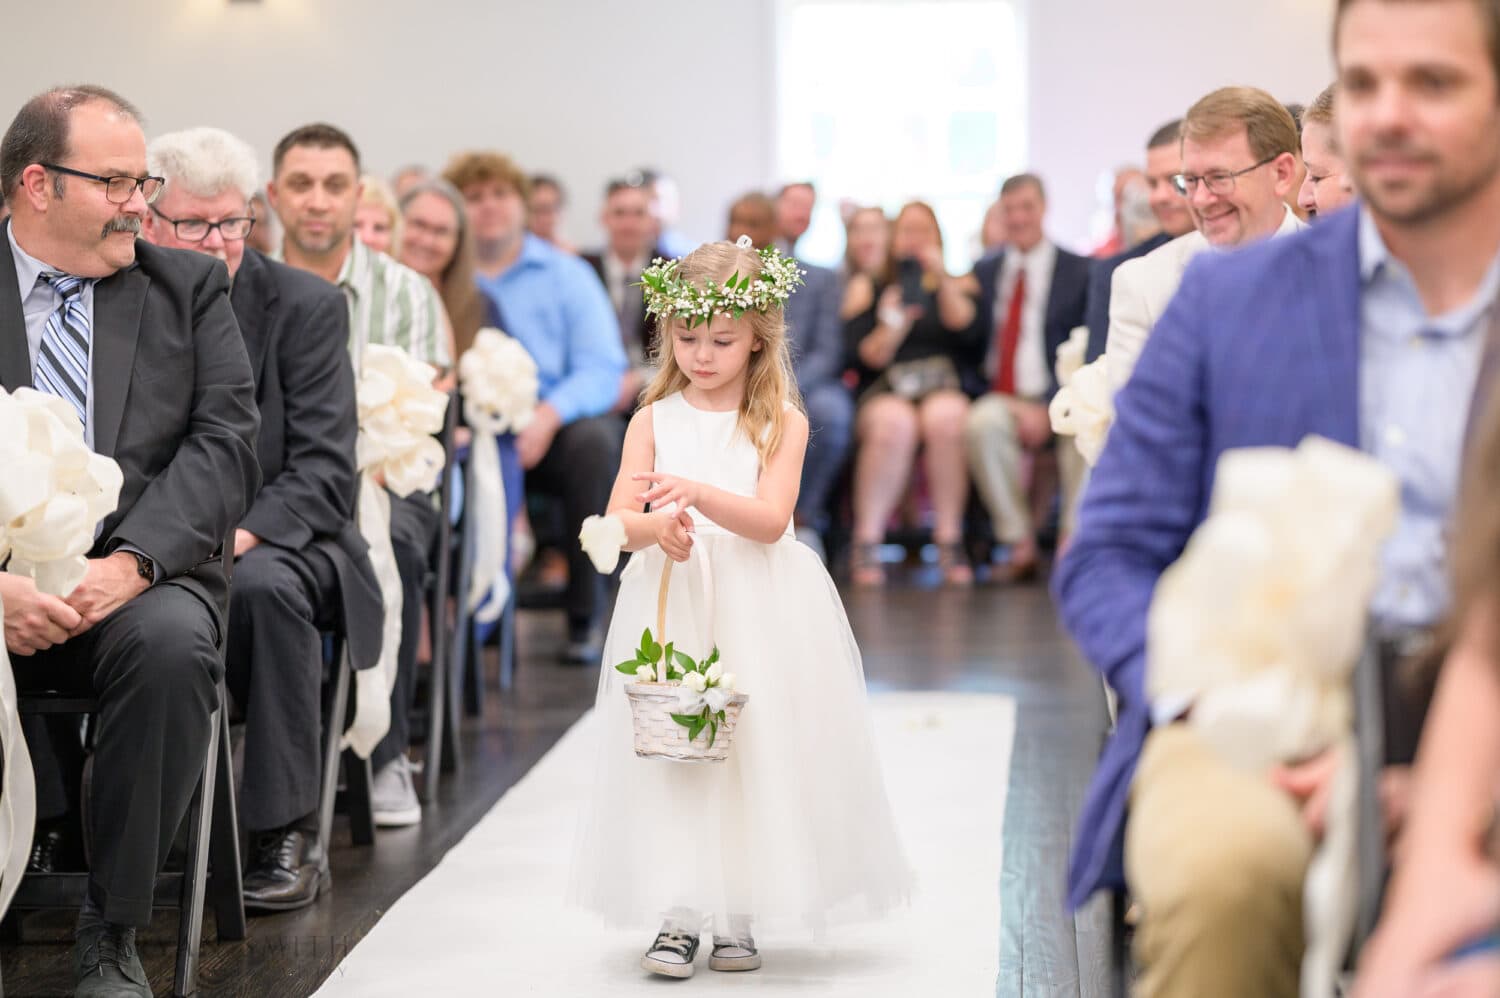 Flower girl walking down the aisle - The Village House at Litchfield